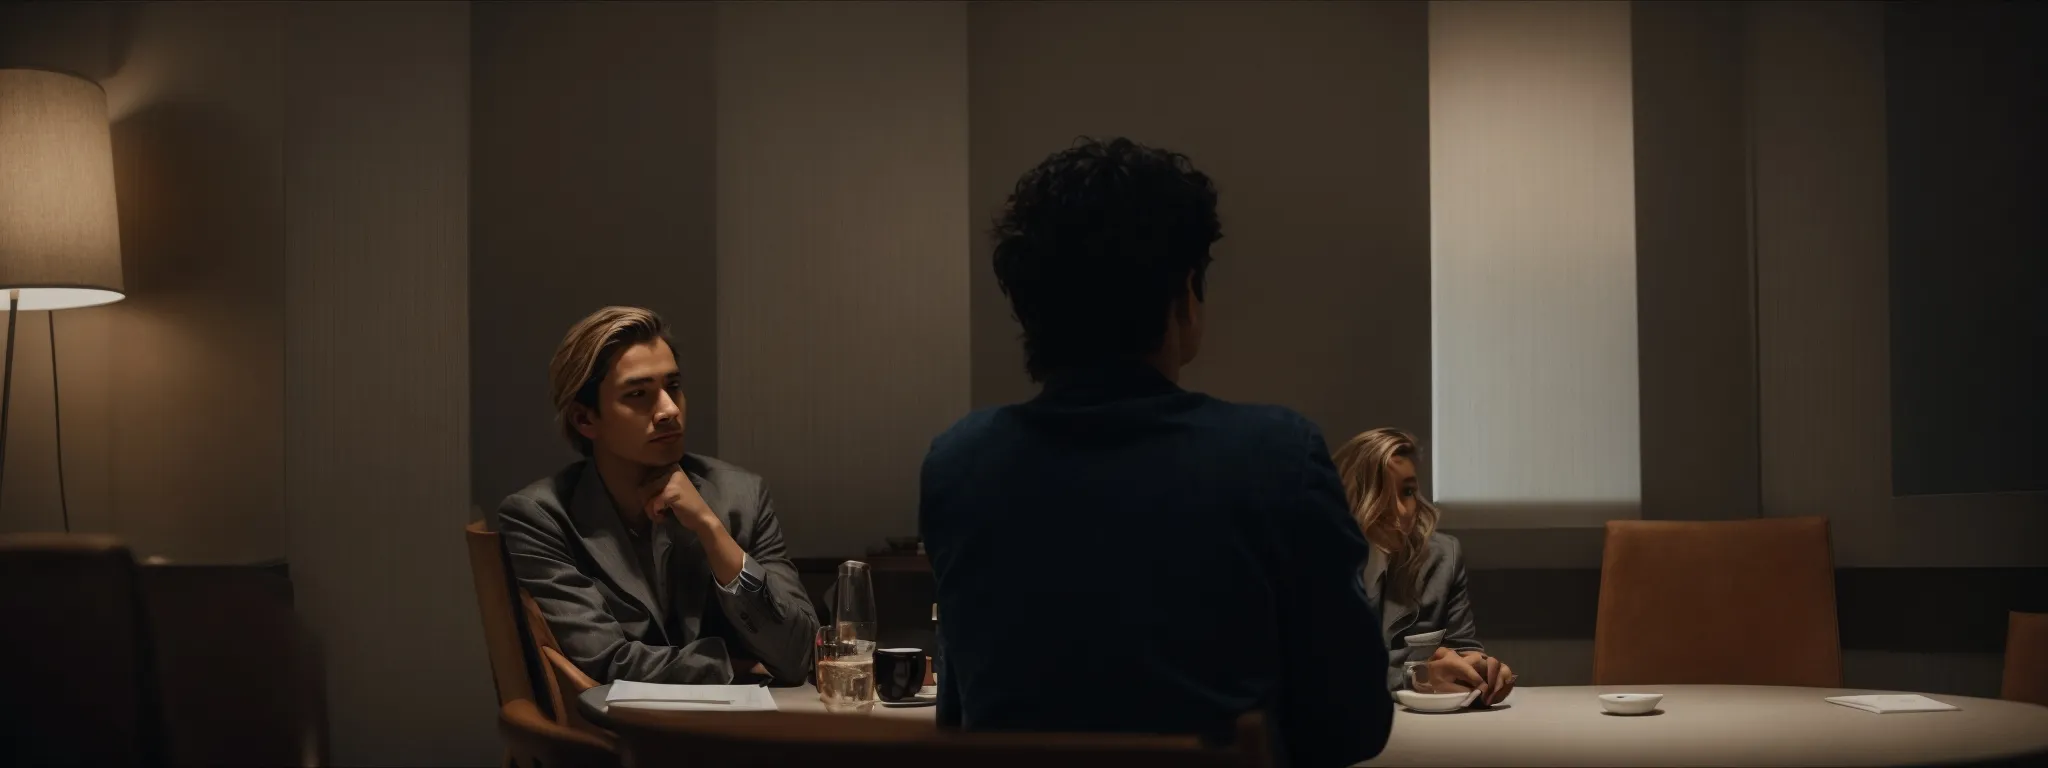 two individuals sit opposite each other at a round table, earnestly engaged in deep conversation amidst a softly lit room.